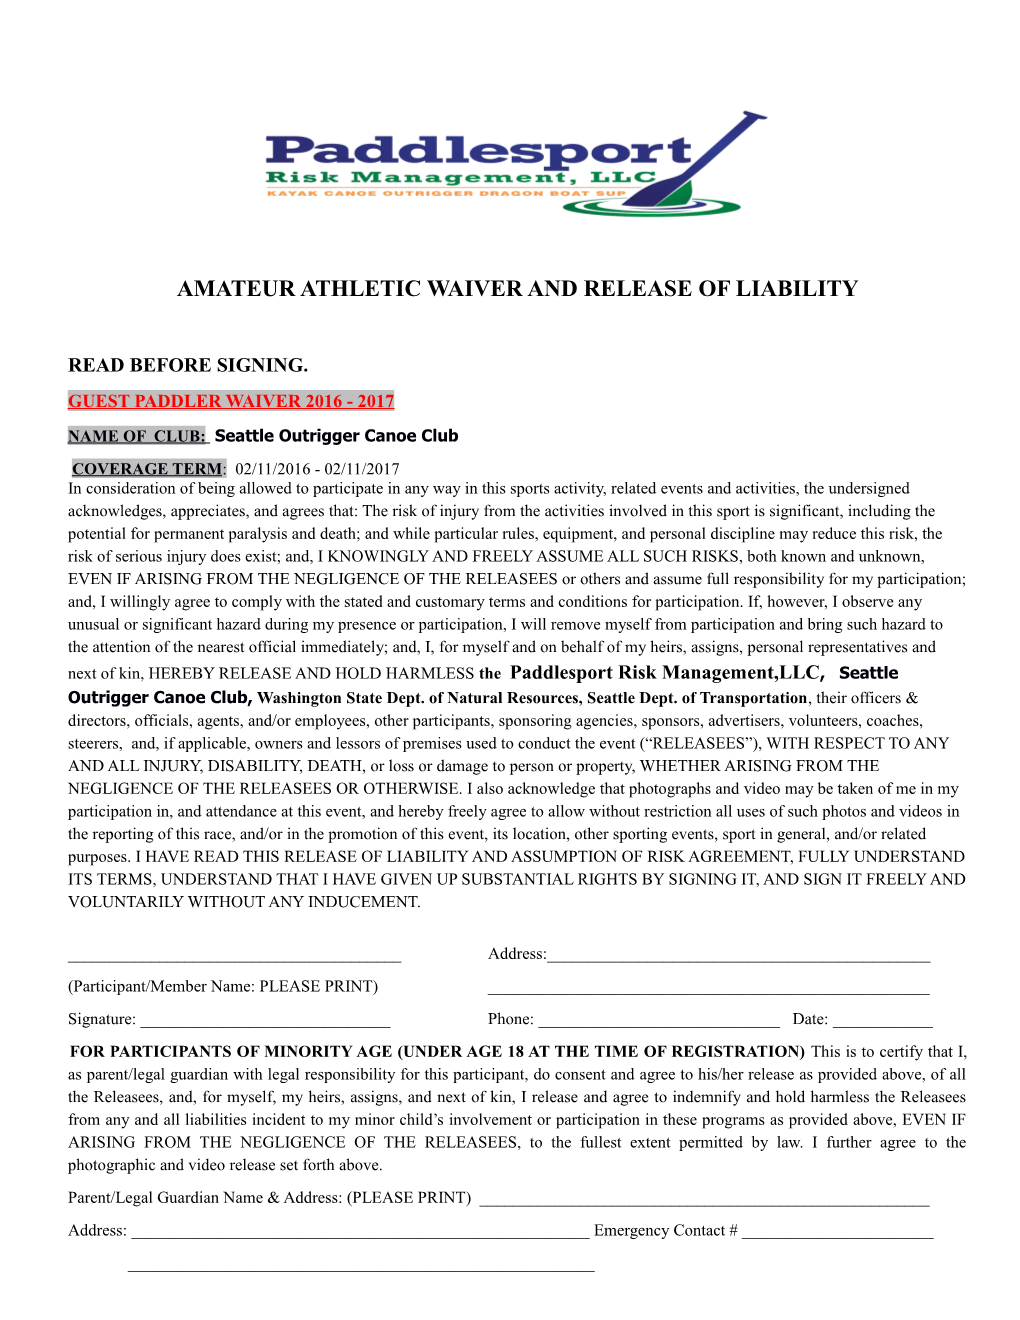 Amateur Athletic Waiver and Release of Liability